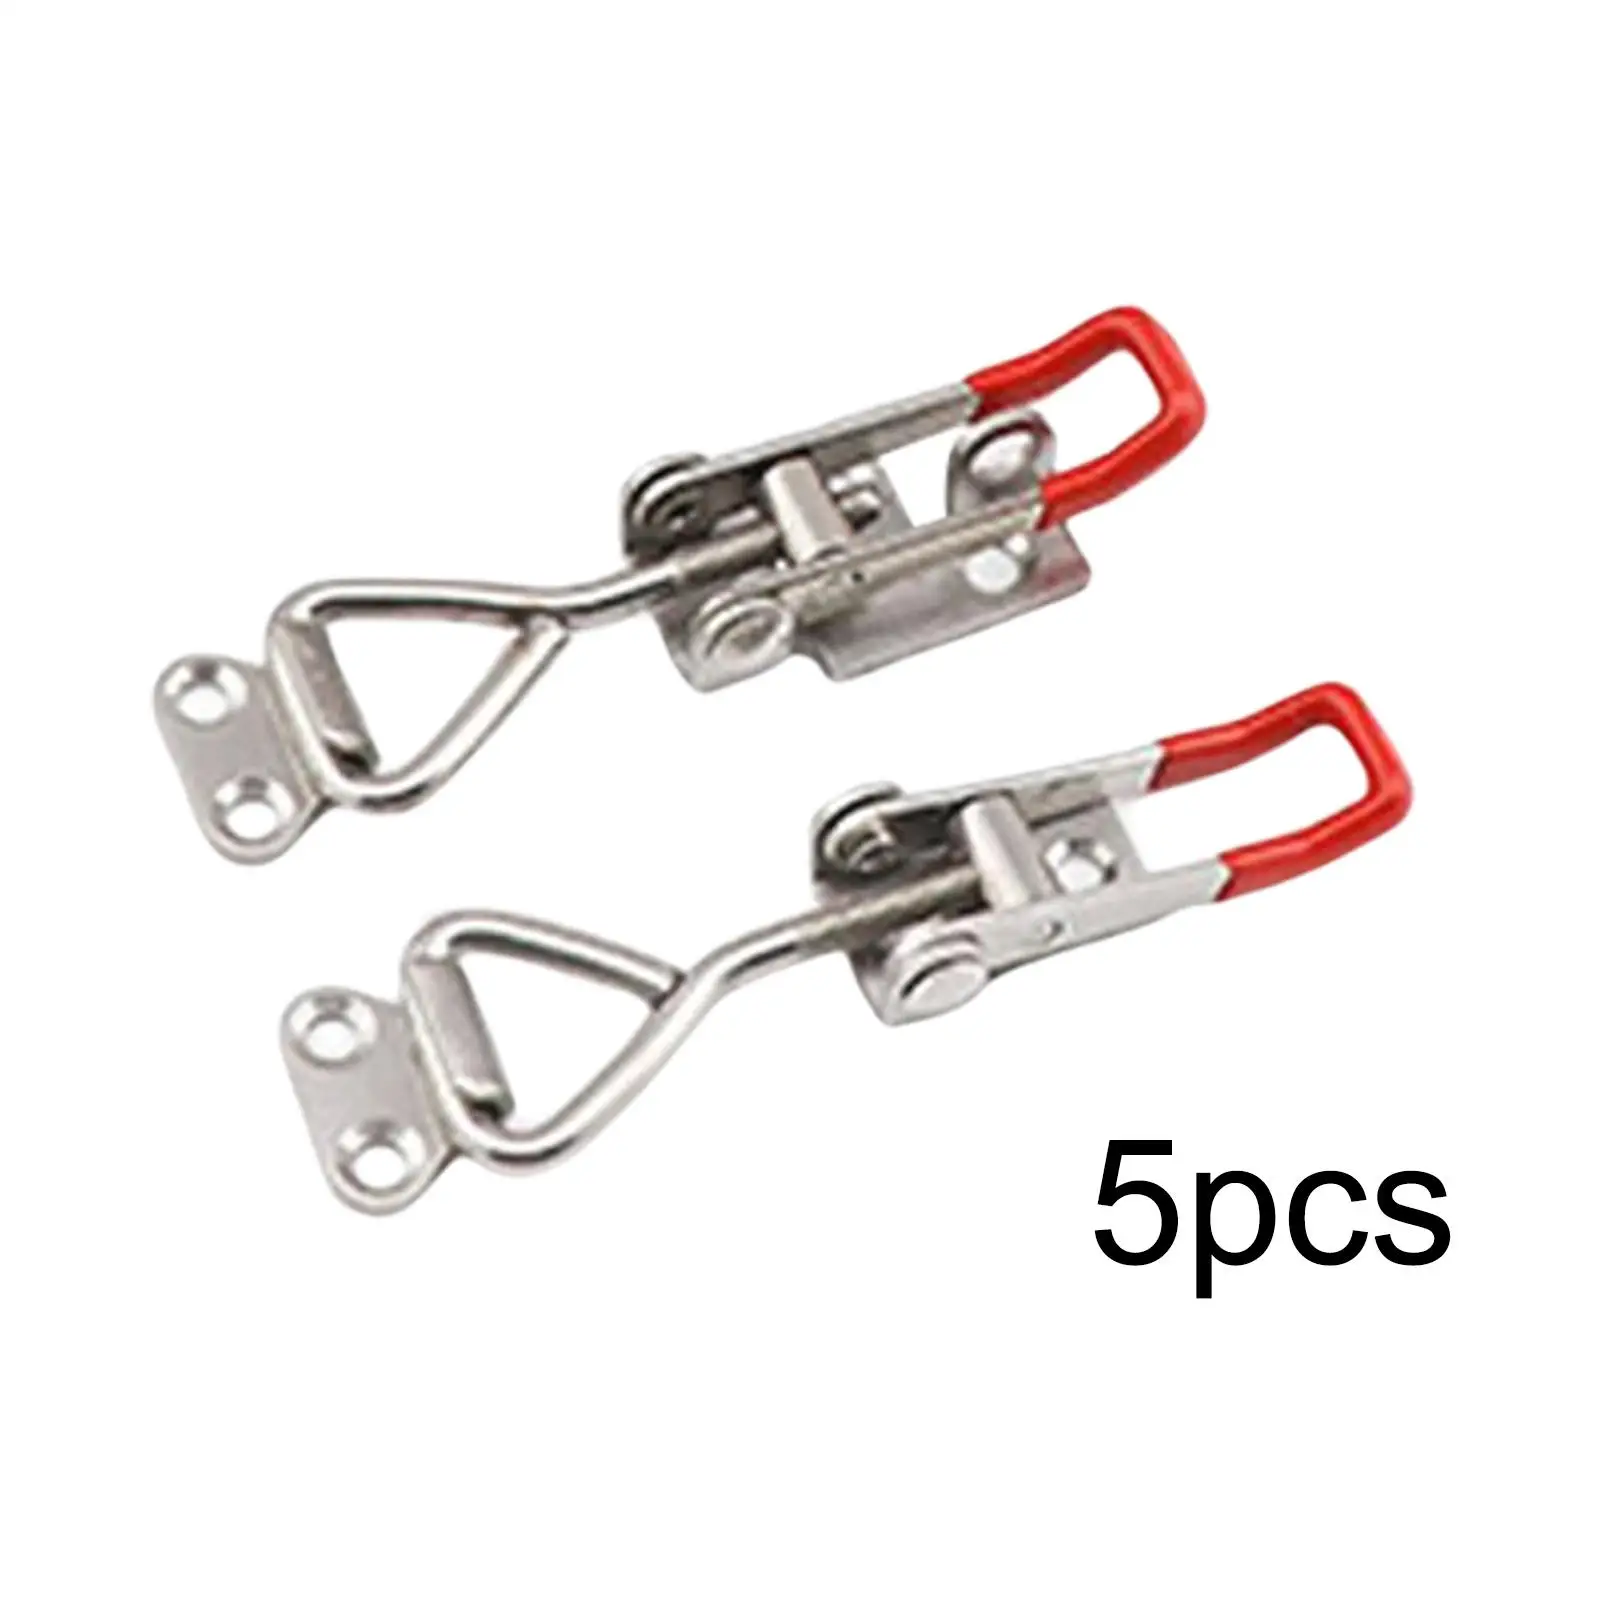 5Pcs Push Pull Toggle Clamp Stainless Steel Hand Tool Lightweight Easy to Use Non Slip Portable Sturdy for Furniture Hardware